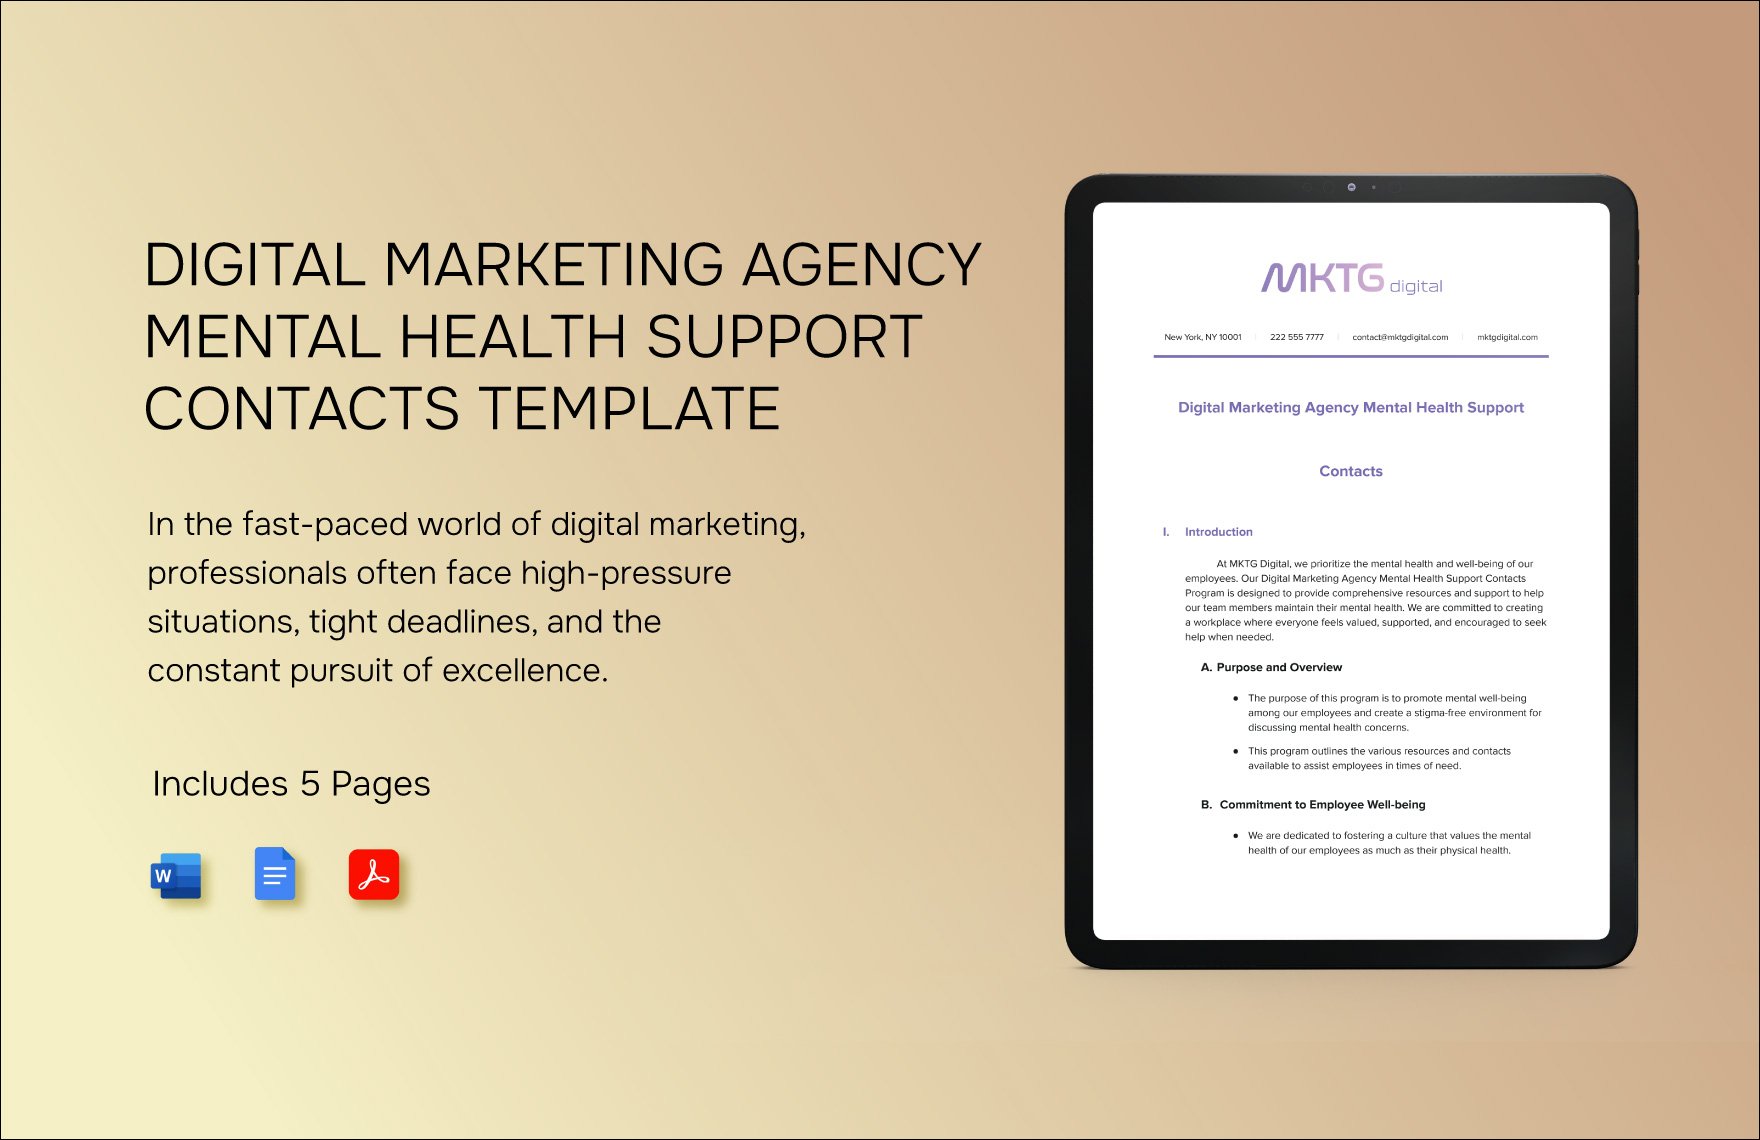 Digital Marketing Agency Mental Health Support Contacts Template